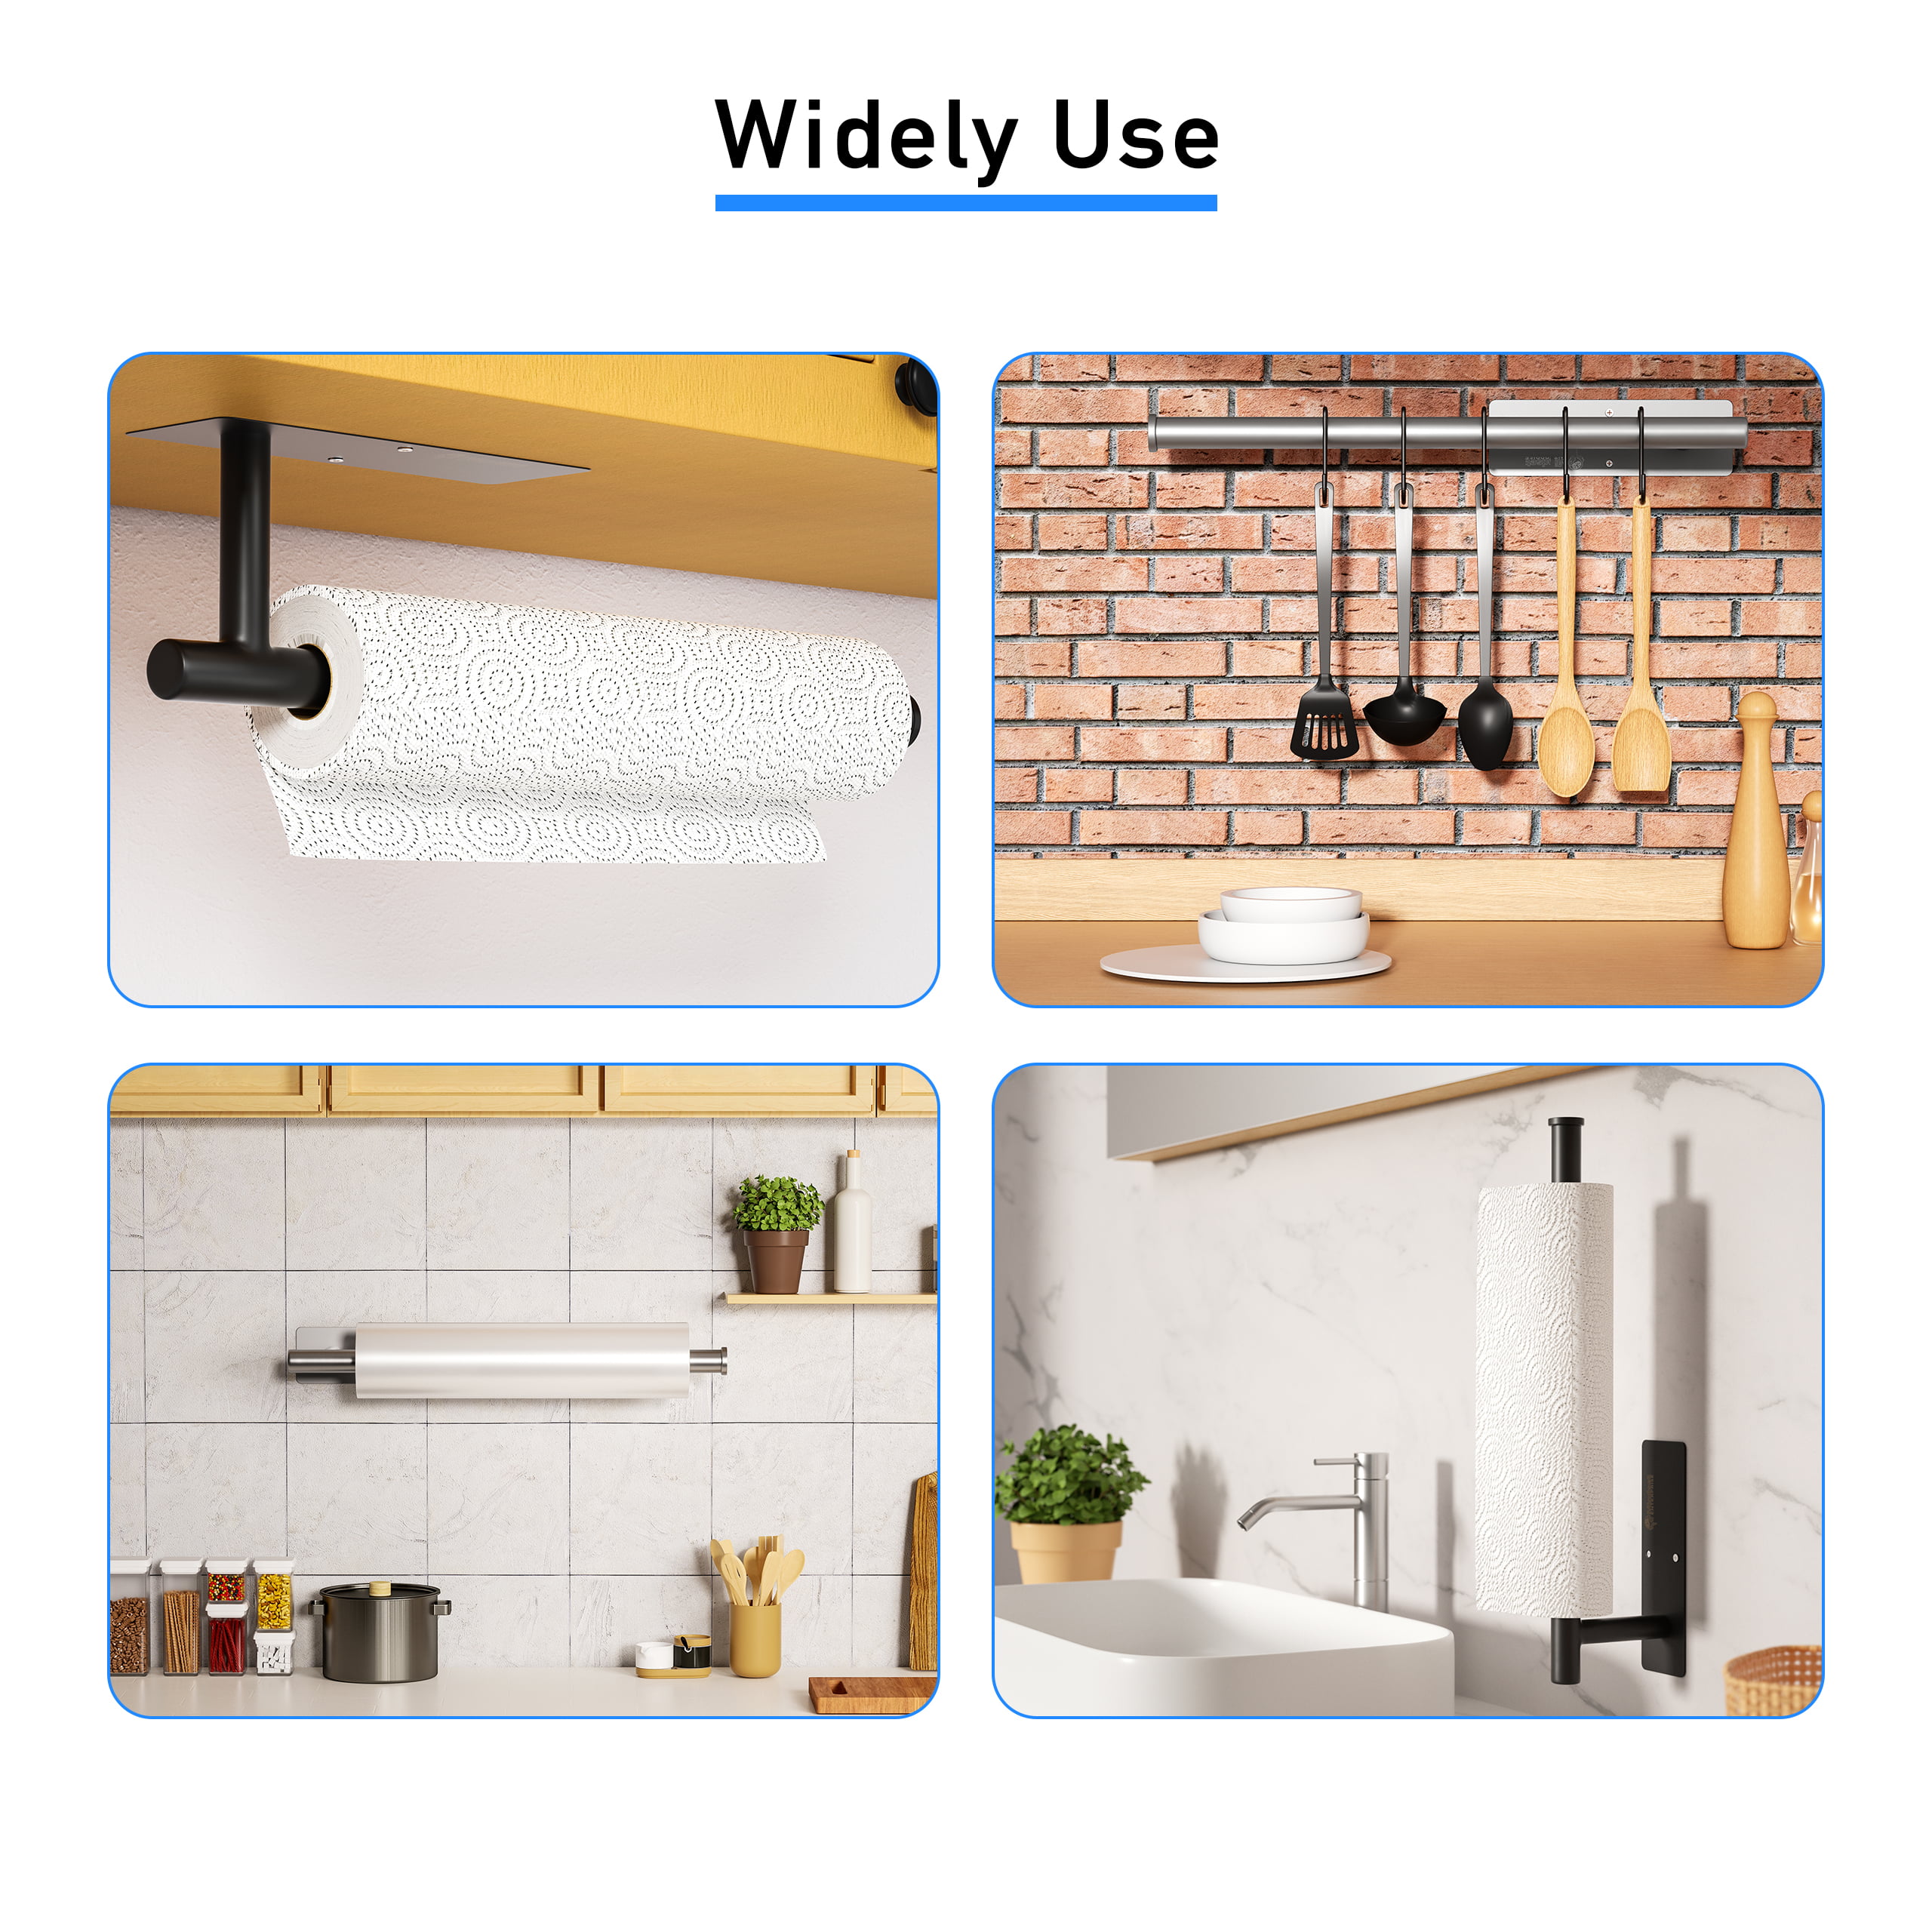 A Stainless Steel Paper Towel Holder For Household And Commercial Use -  Suitable For Kitchen, Under Cabinet Self-adhesive Installation, Bedroom,  Living Room, Bathroom, With Options Of 3m Tape And Screws Available. It